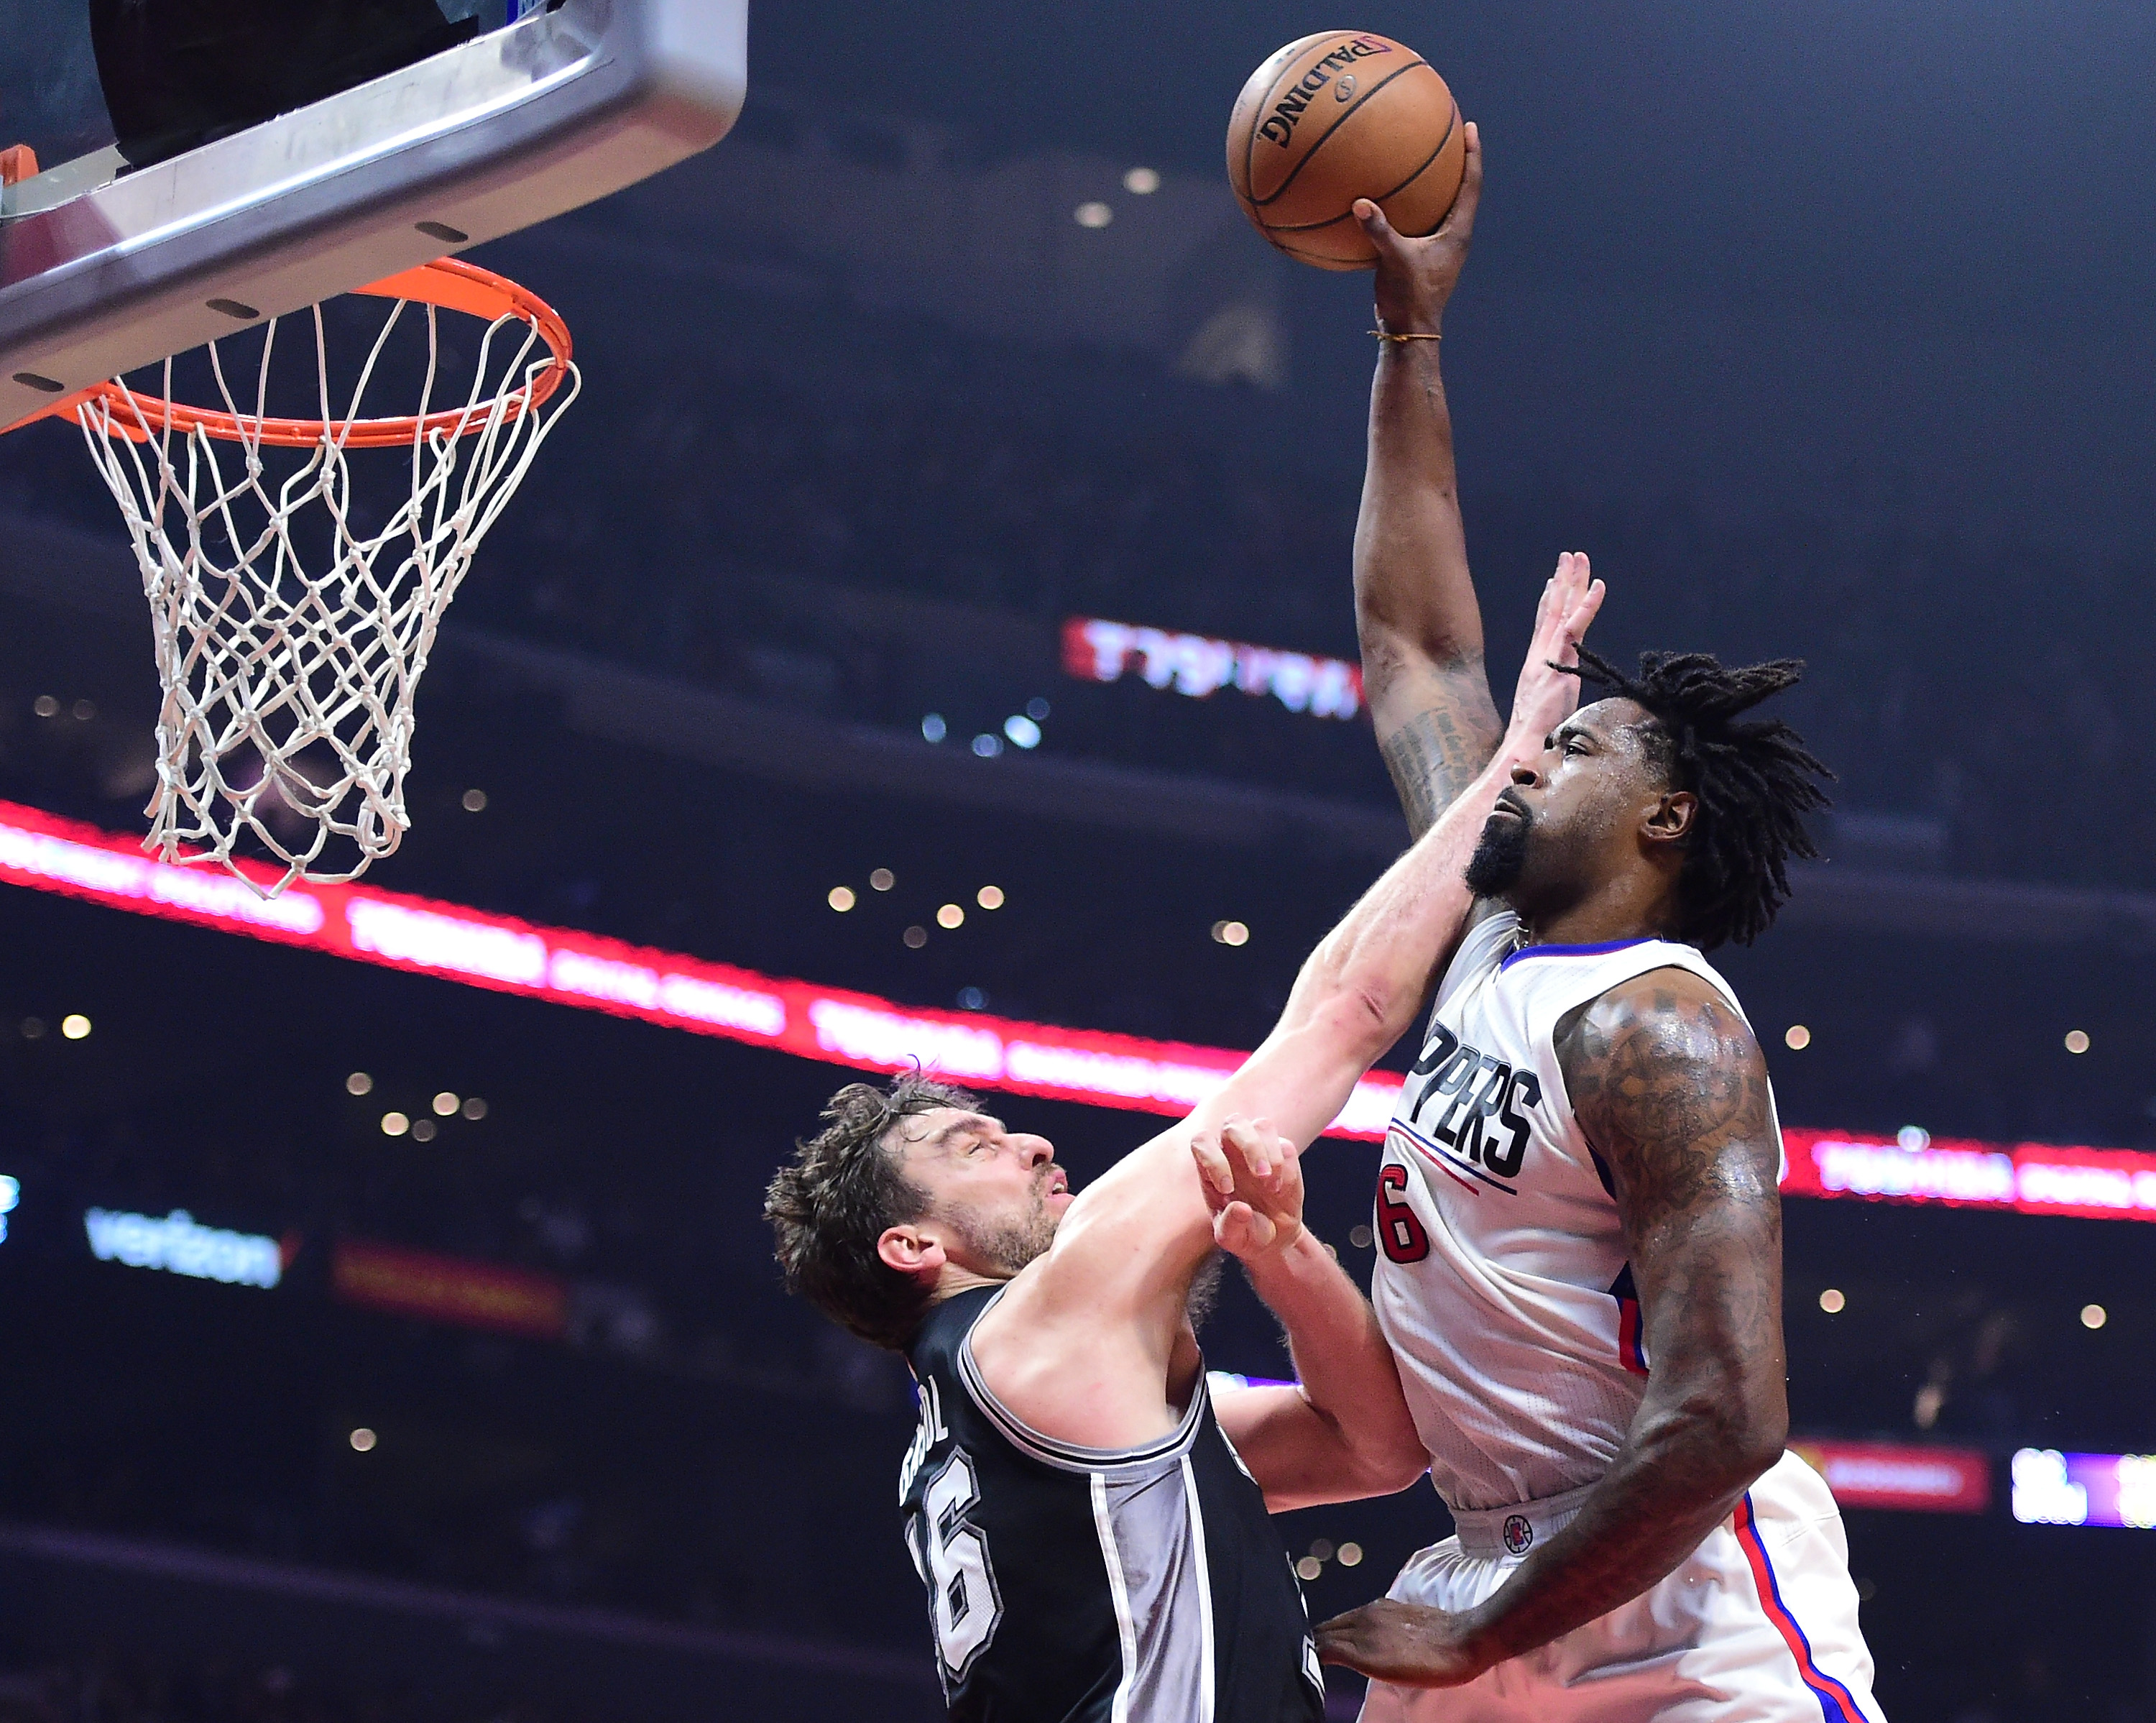 DeAndre Jordan says he’s considering doing the dunk contest The